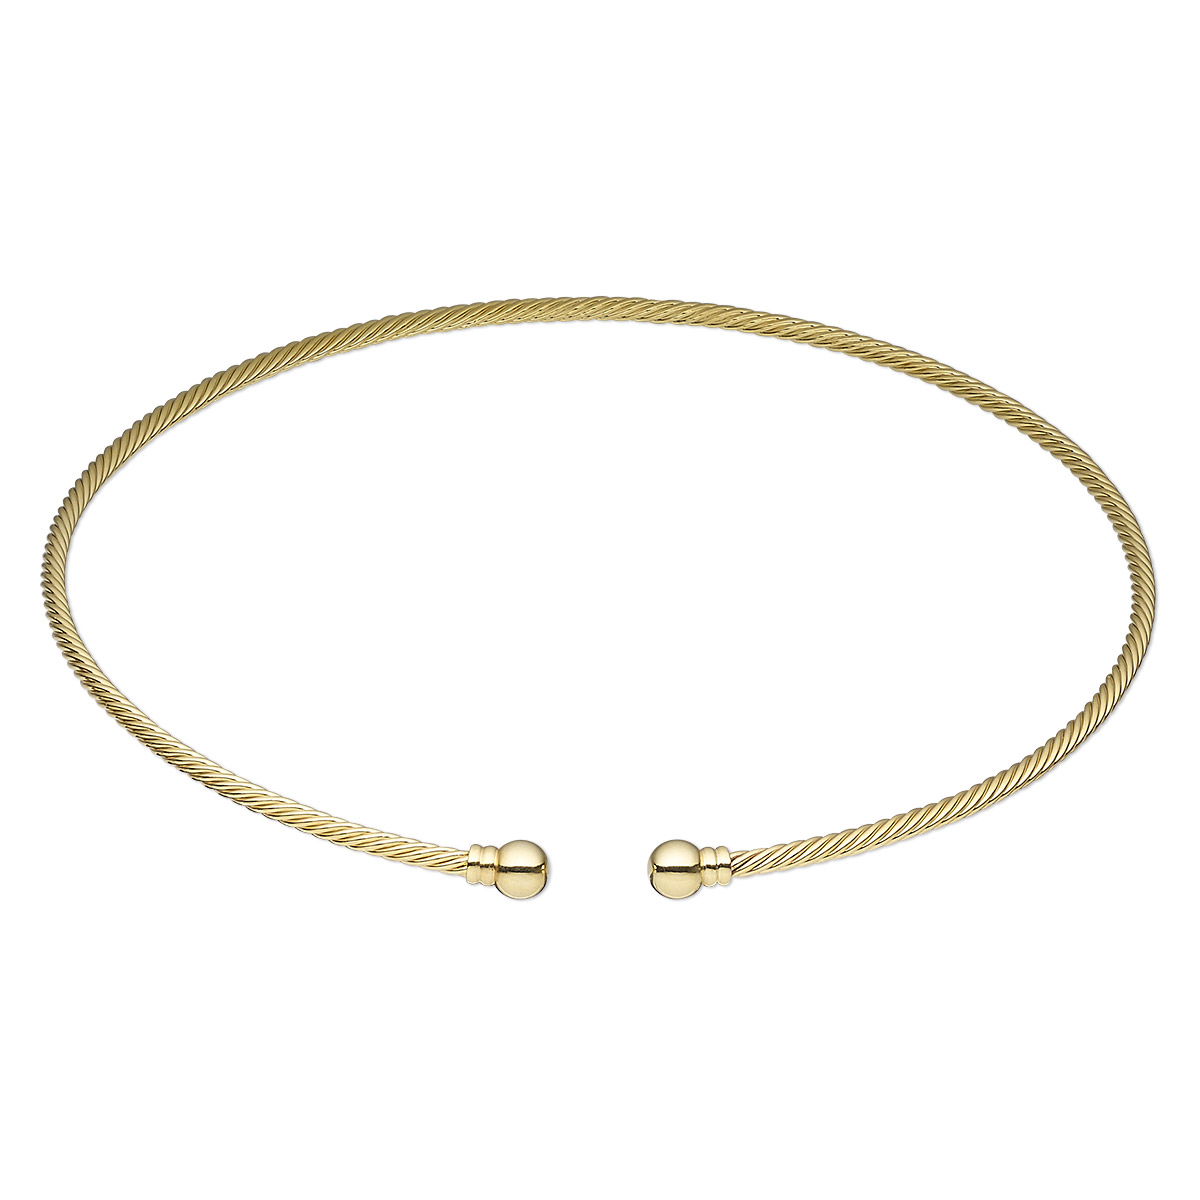 Neckwire, gold-plated brass, 3.5mm rigid twisted wire, 18 inches with ...